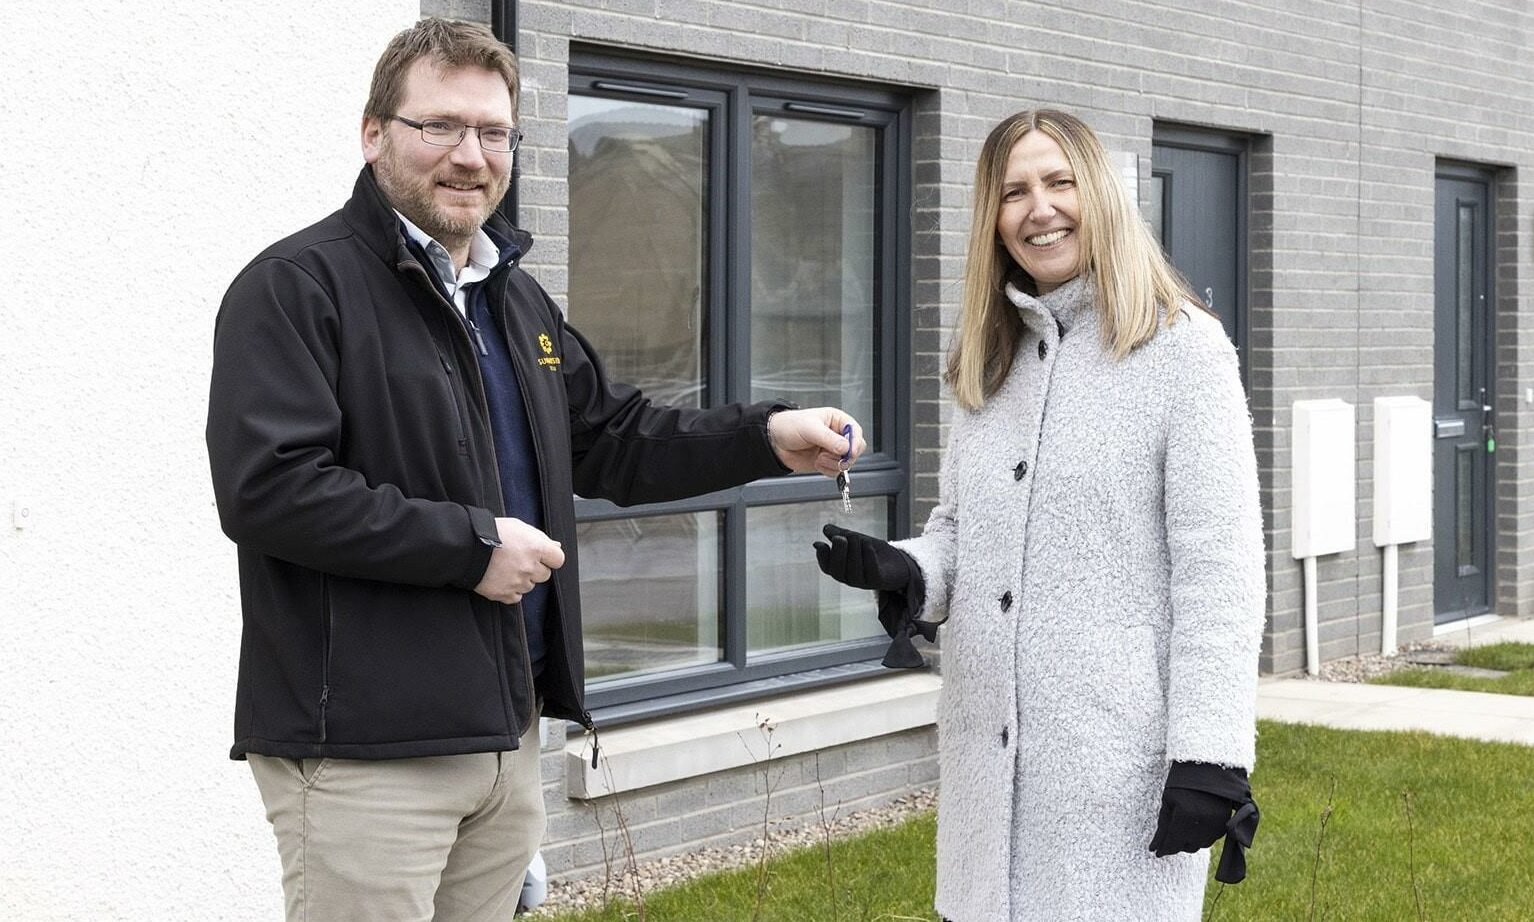 Director of Sunnyside Estate David Stewart hands over the keys of 12 new affordable homes to Hillcrest Homes deputy chief executive Fiona Morrison.